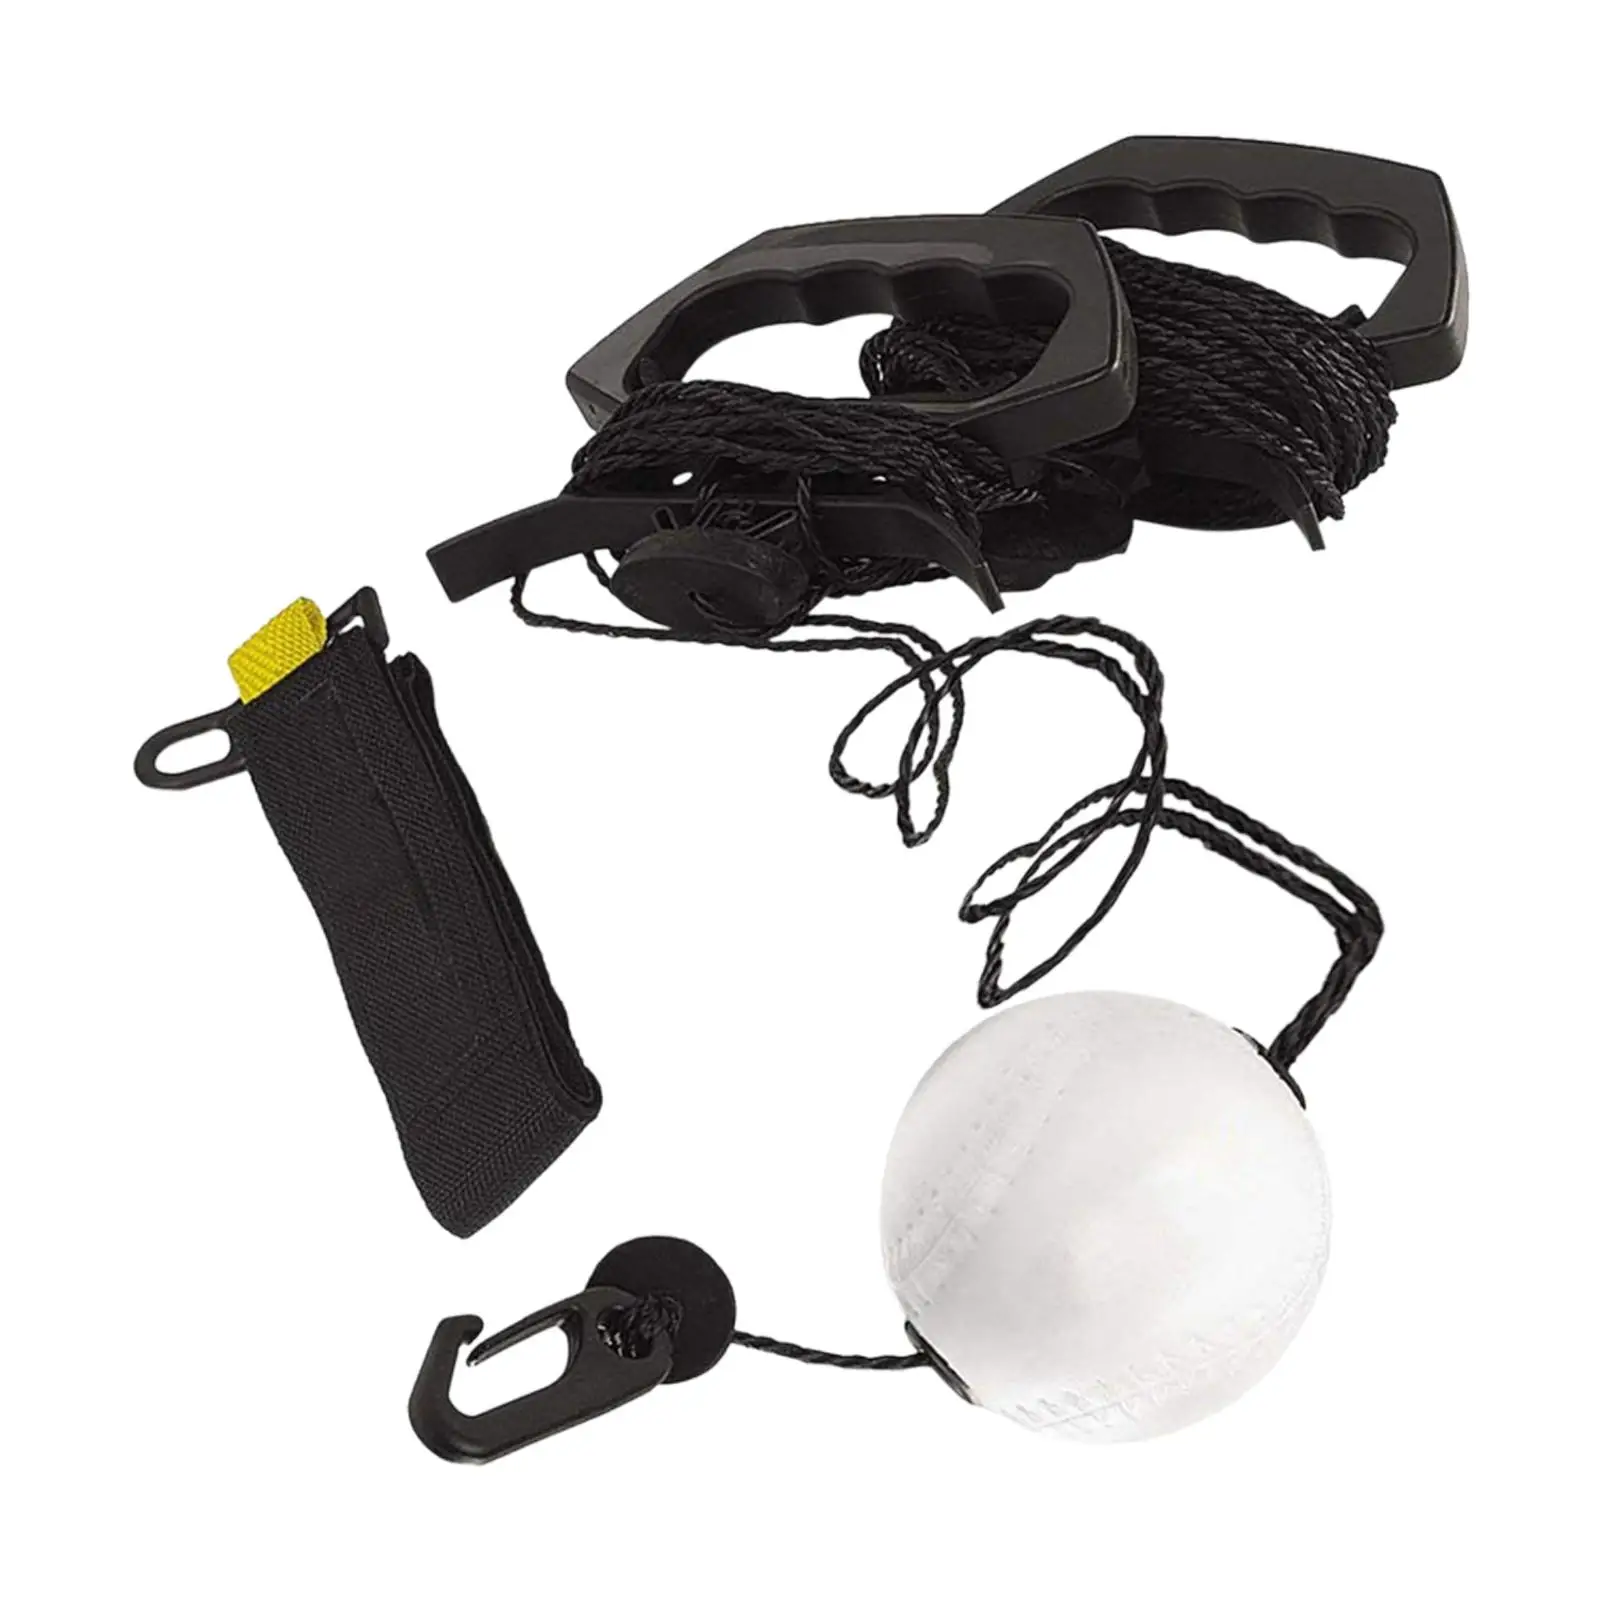 

Baseball Batting Trainer Training Aid Softball Practice Swing for Gesture Movement Guide